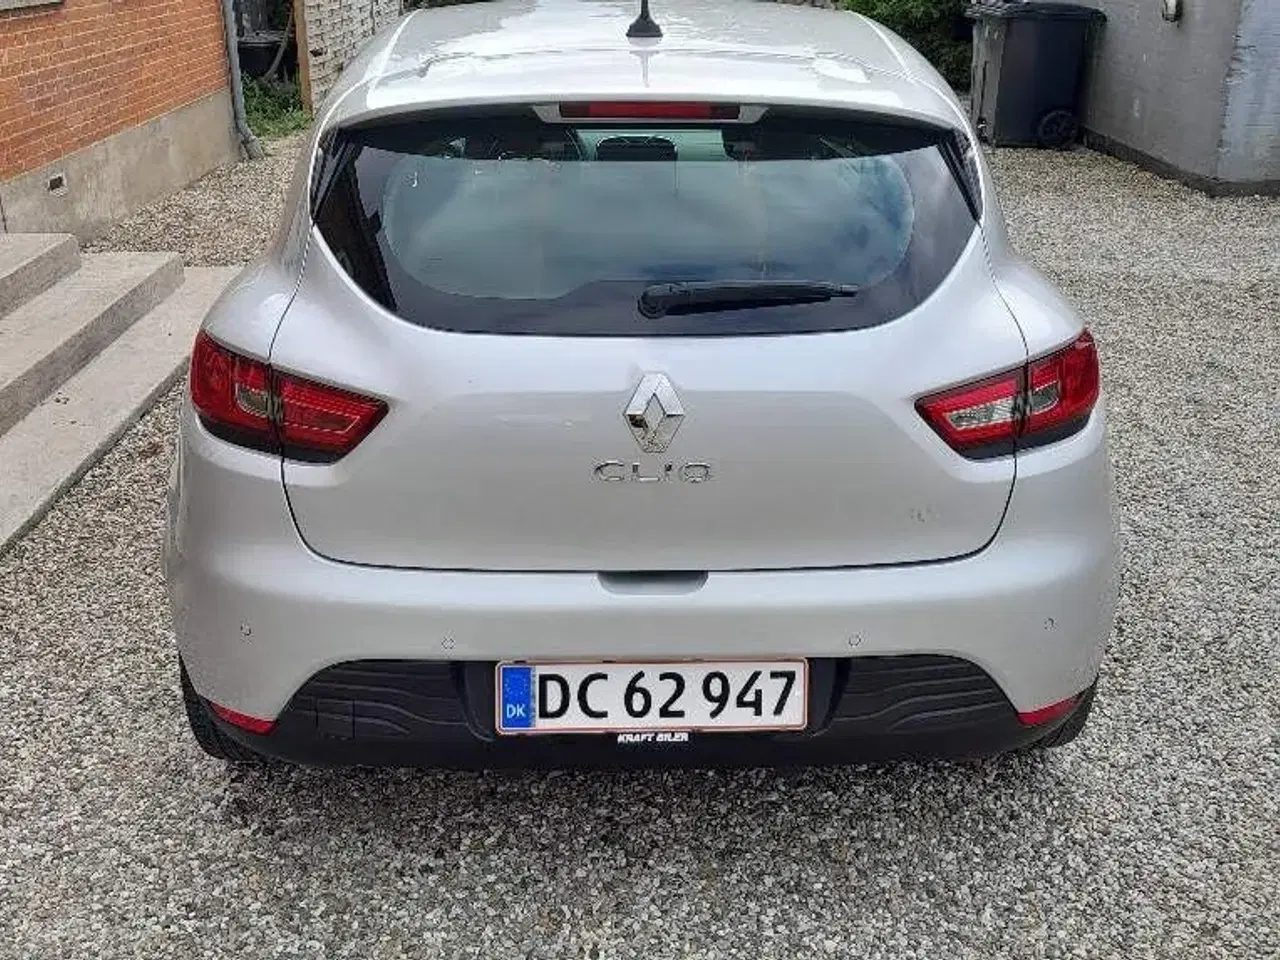 Billede 5 - Renault Ny Clio TCe 90 5d